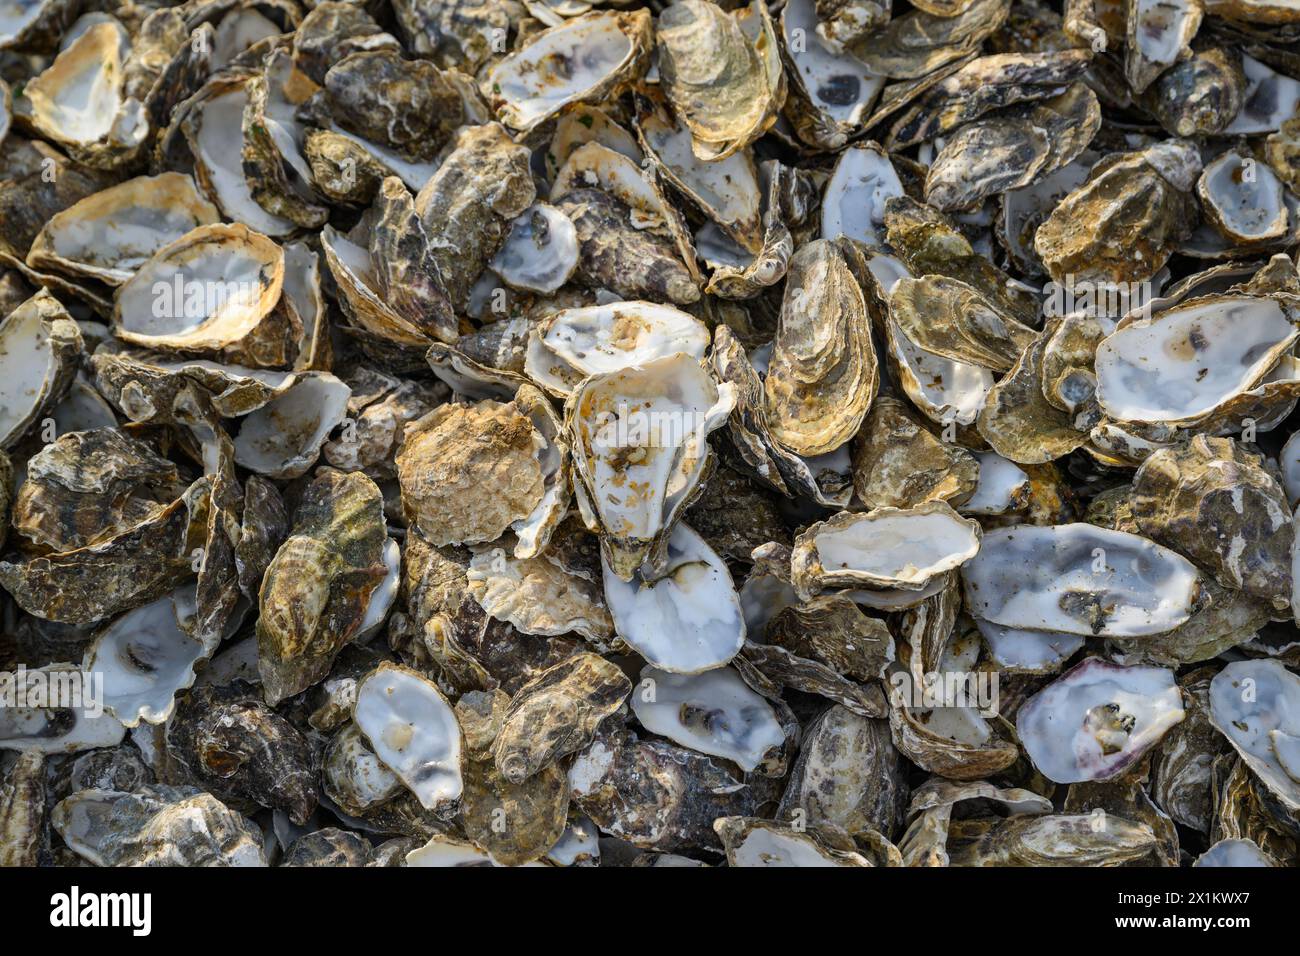 Oyster shells on the beach at Whitstable, Kent, England Stock Photo